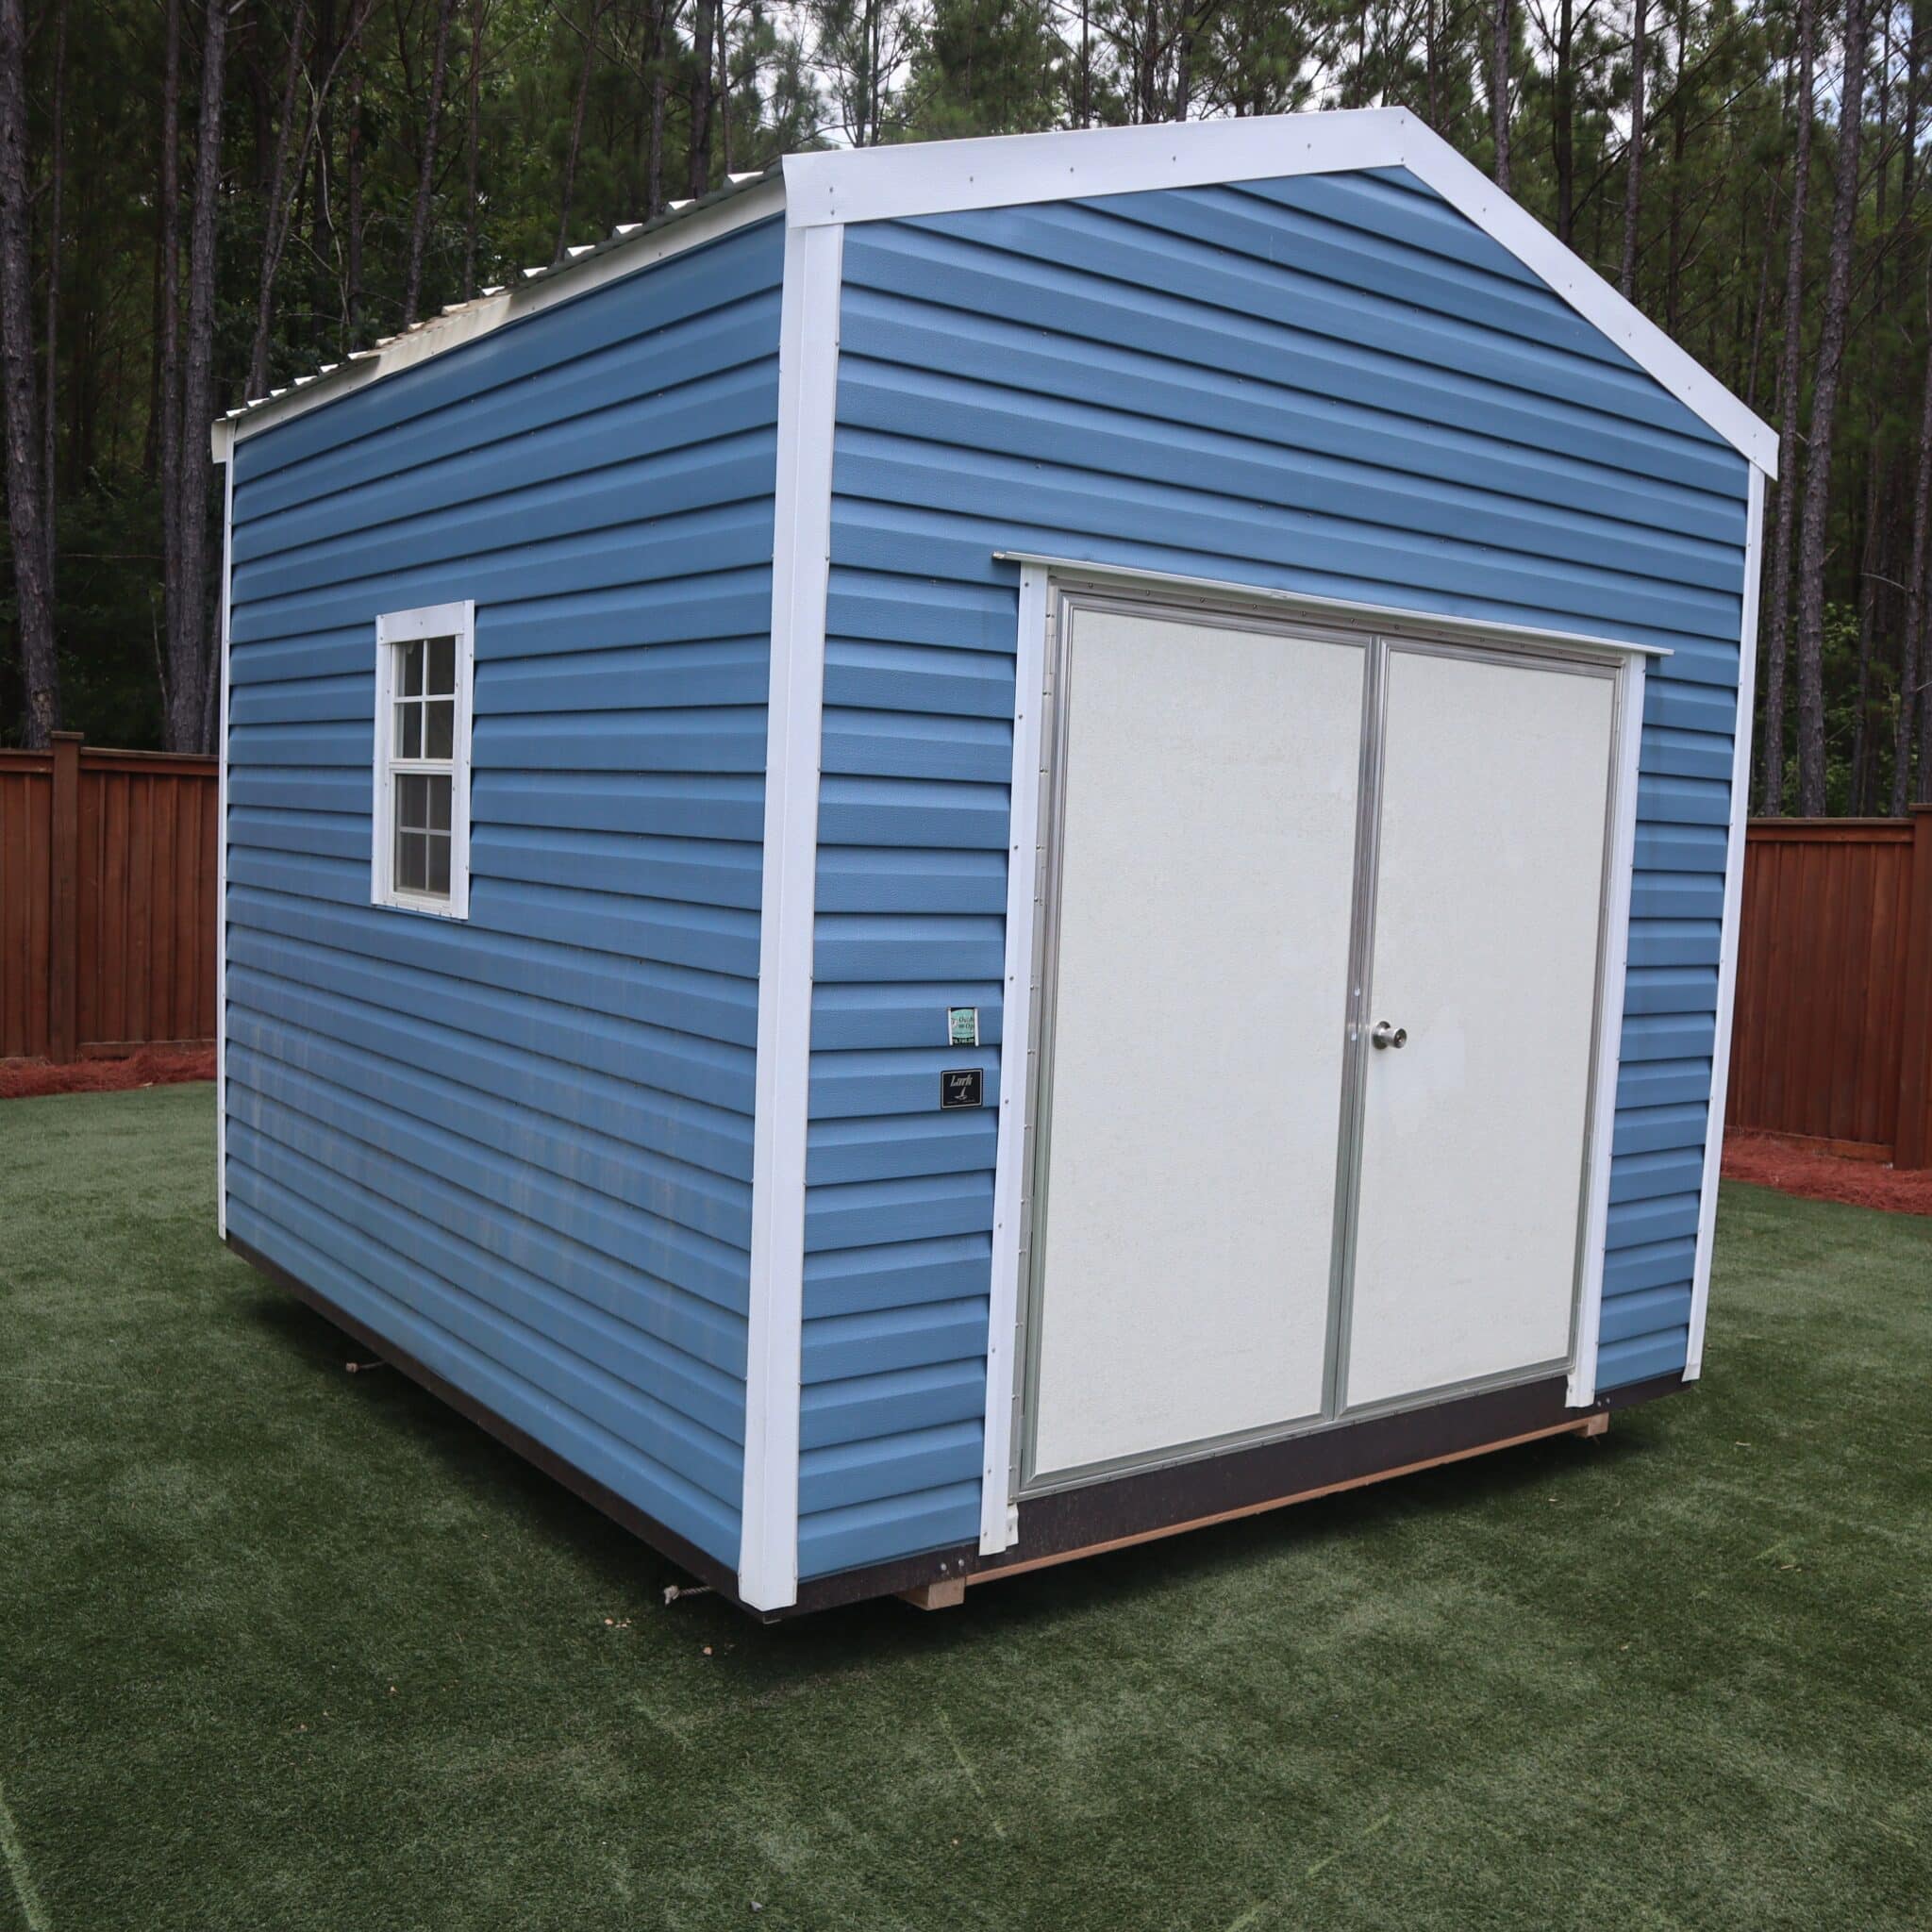 OutdoorOptions Eatonton Georgia 31024 Shed Picture Replace 221 Storage For Your Life Outdoor Options